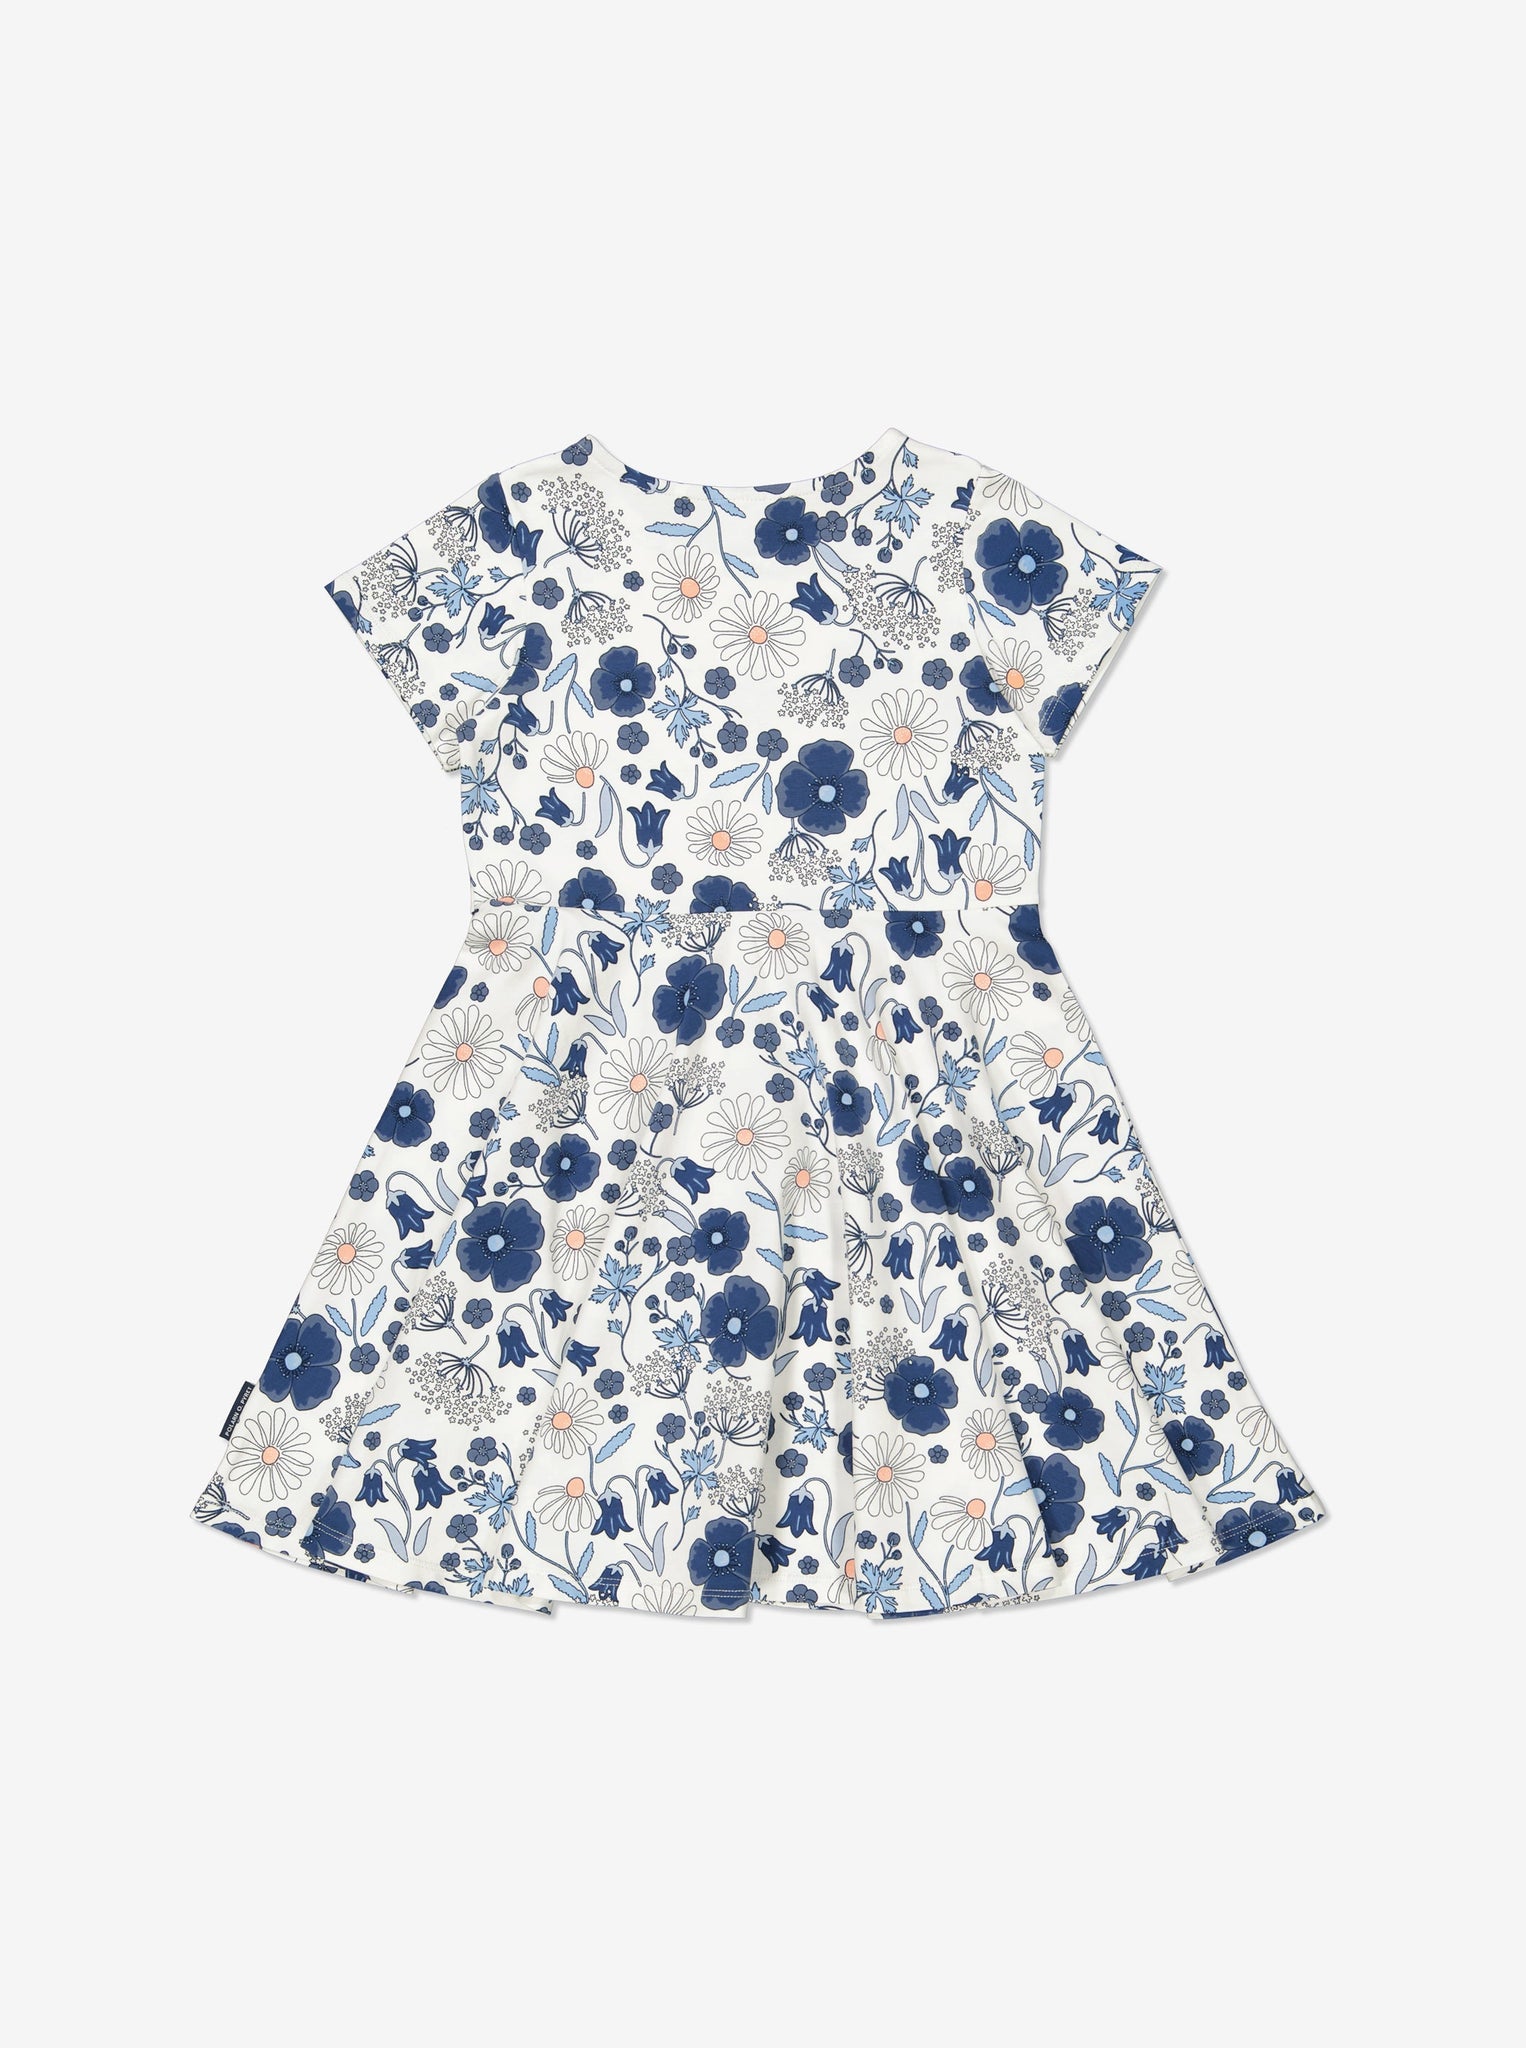 Organic Blue Floral Girls Dress from Polarn O. Pyret Kidswear. Made using sustainable sourced materials.